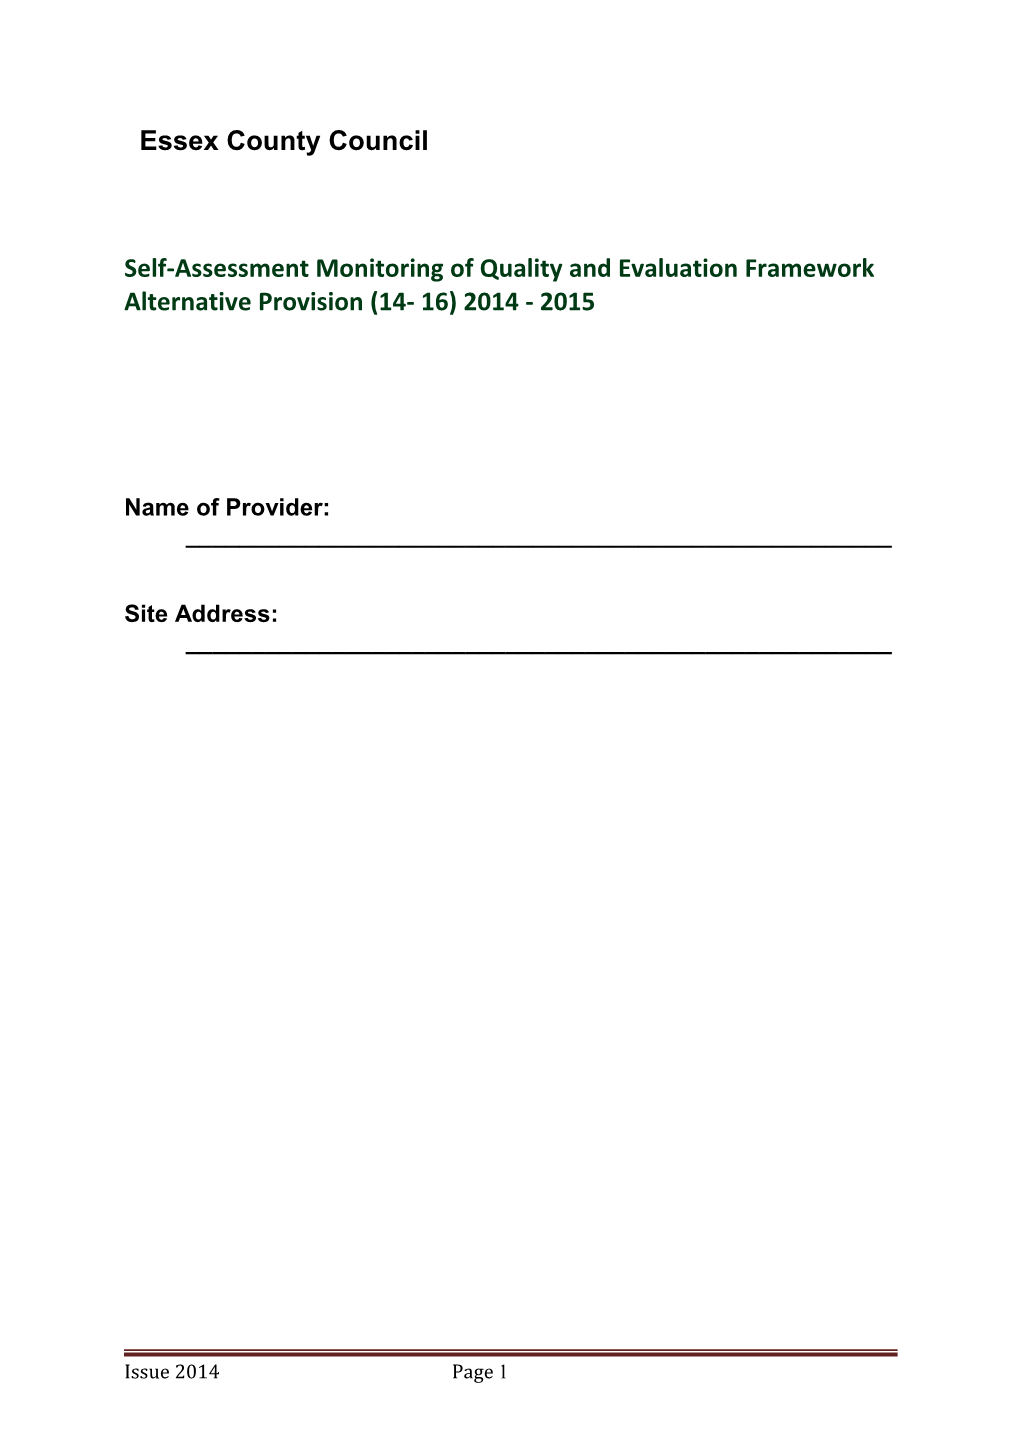 Self-Assessment Monitoring of Quality and Evaluation Framework